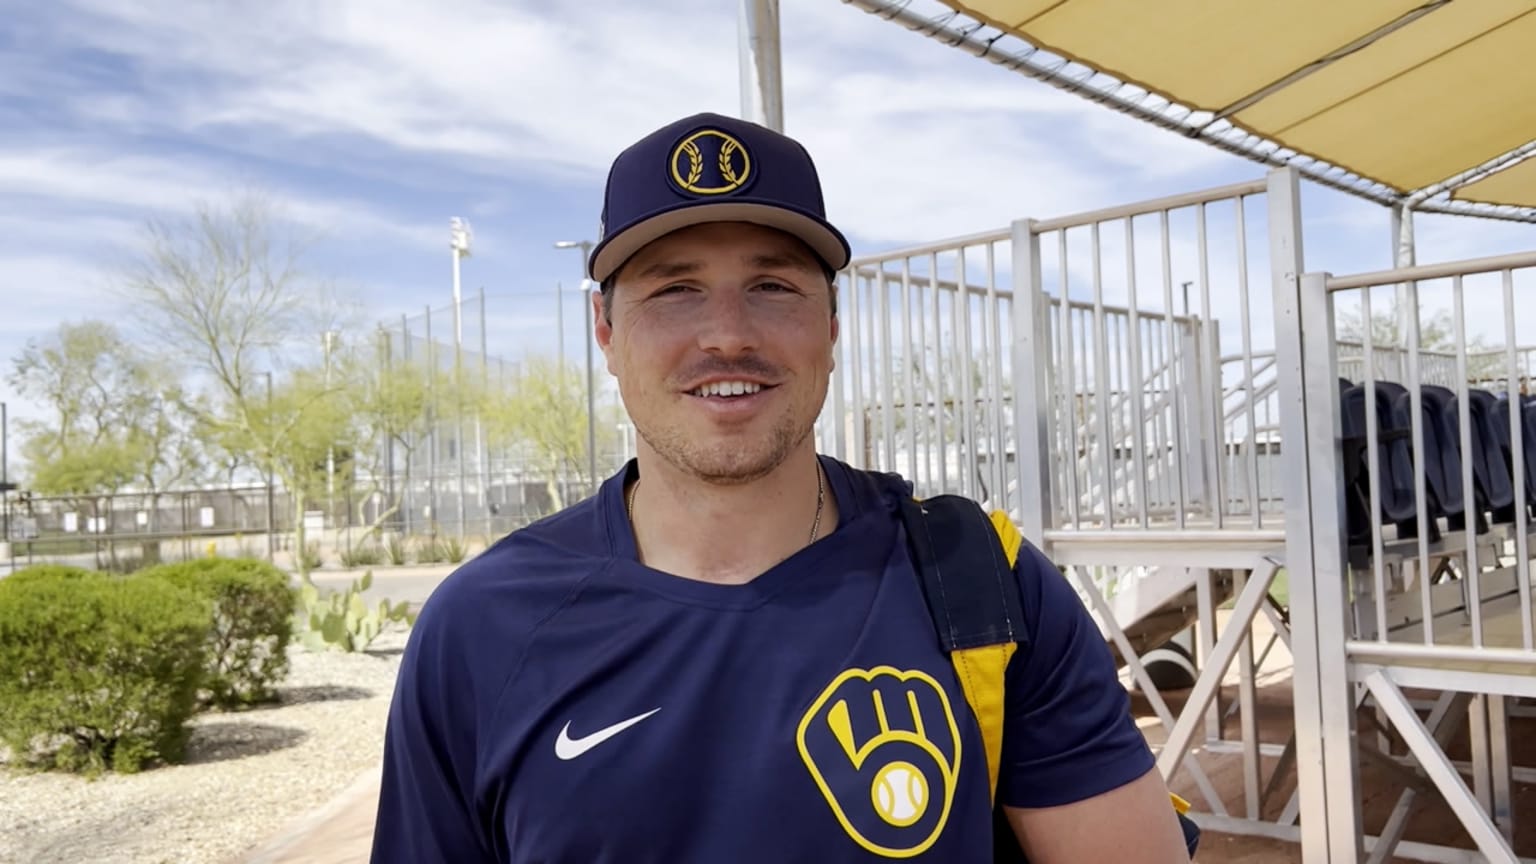 Hunter Renfroe on being traded, 03/13/2022